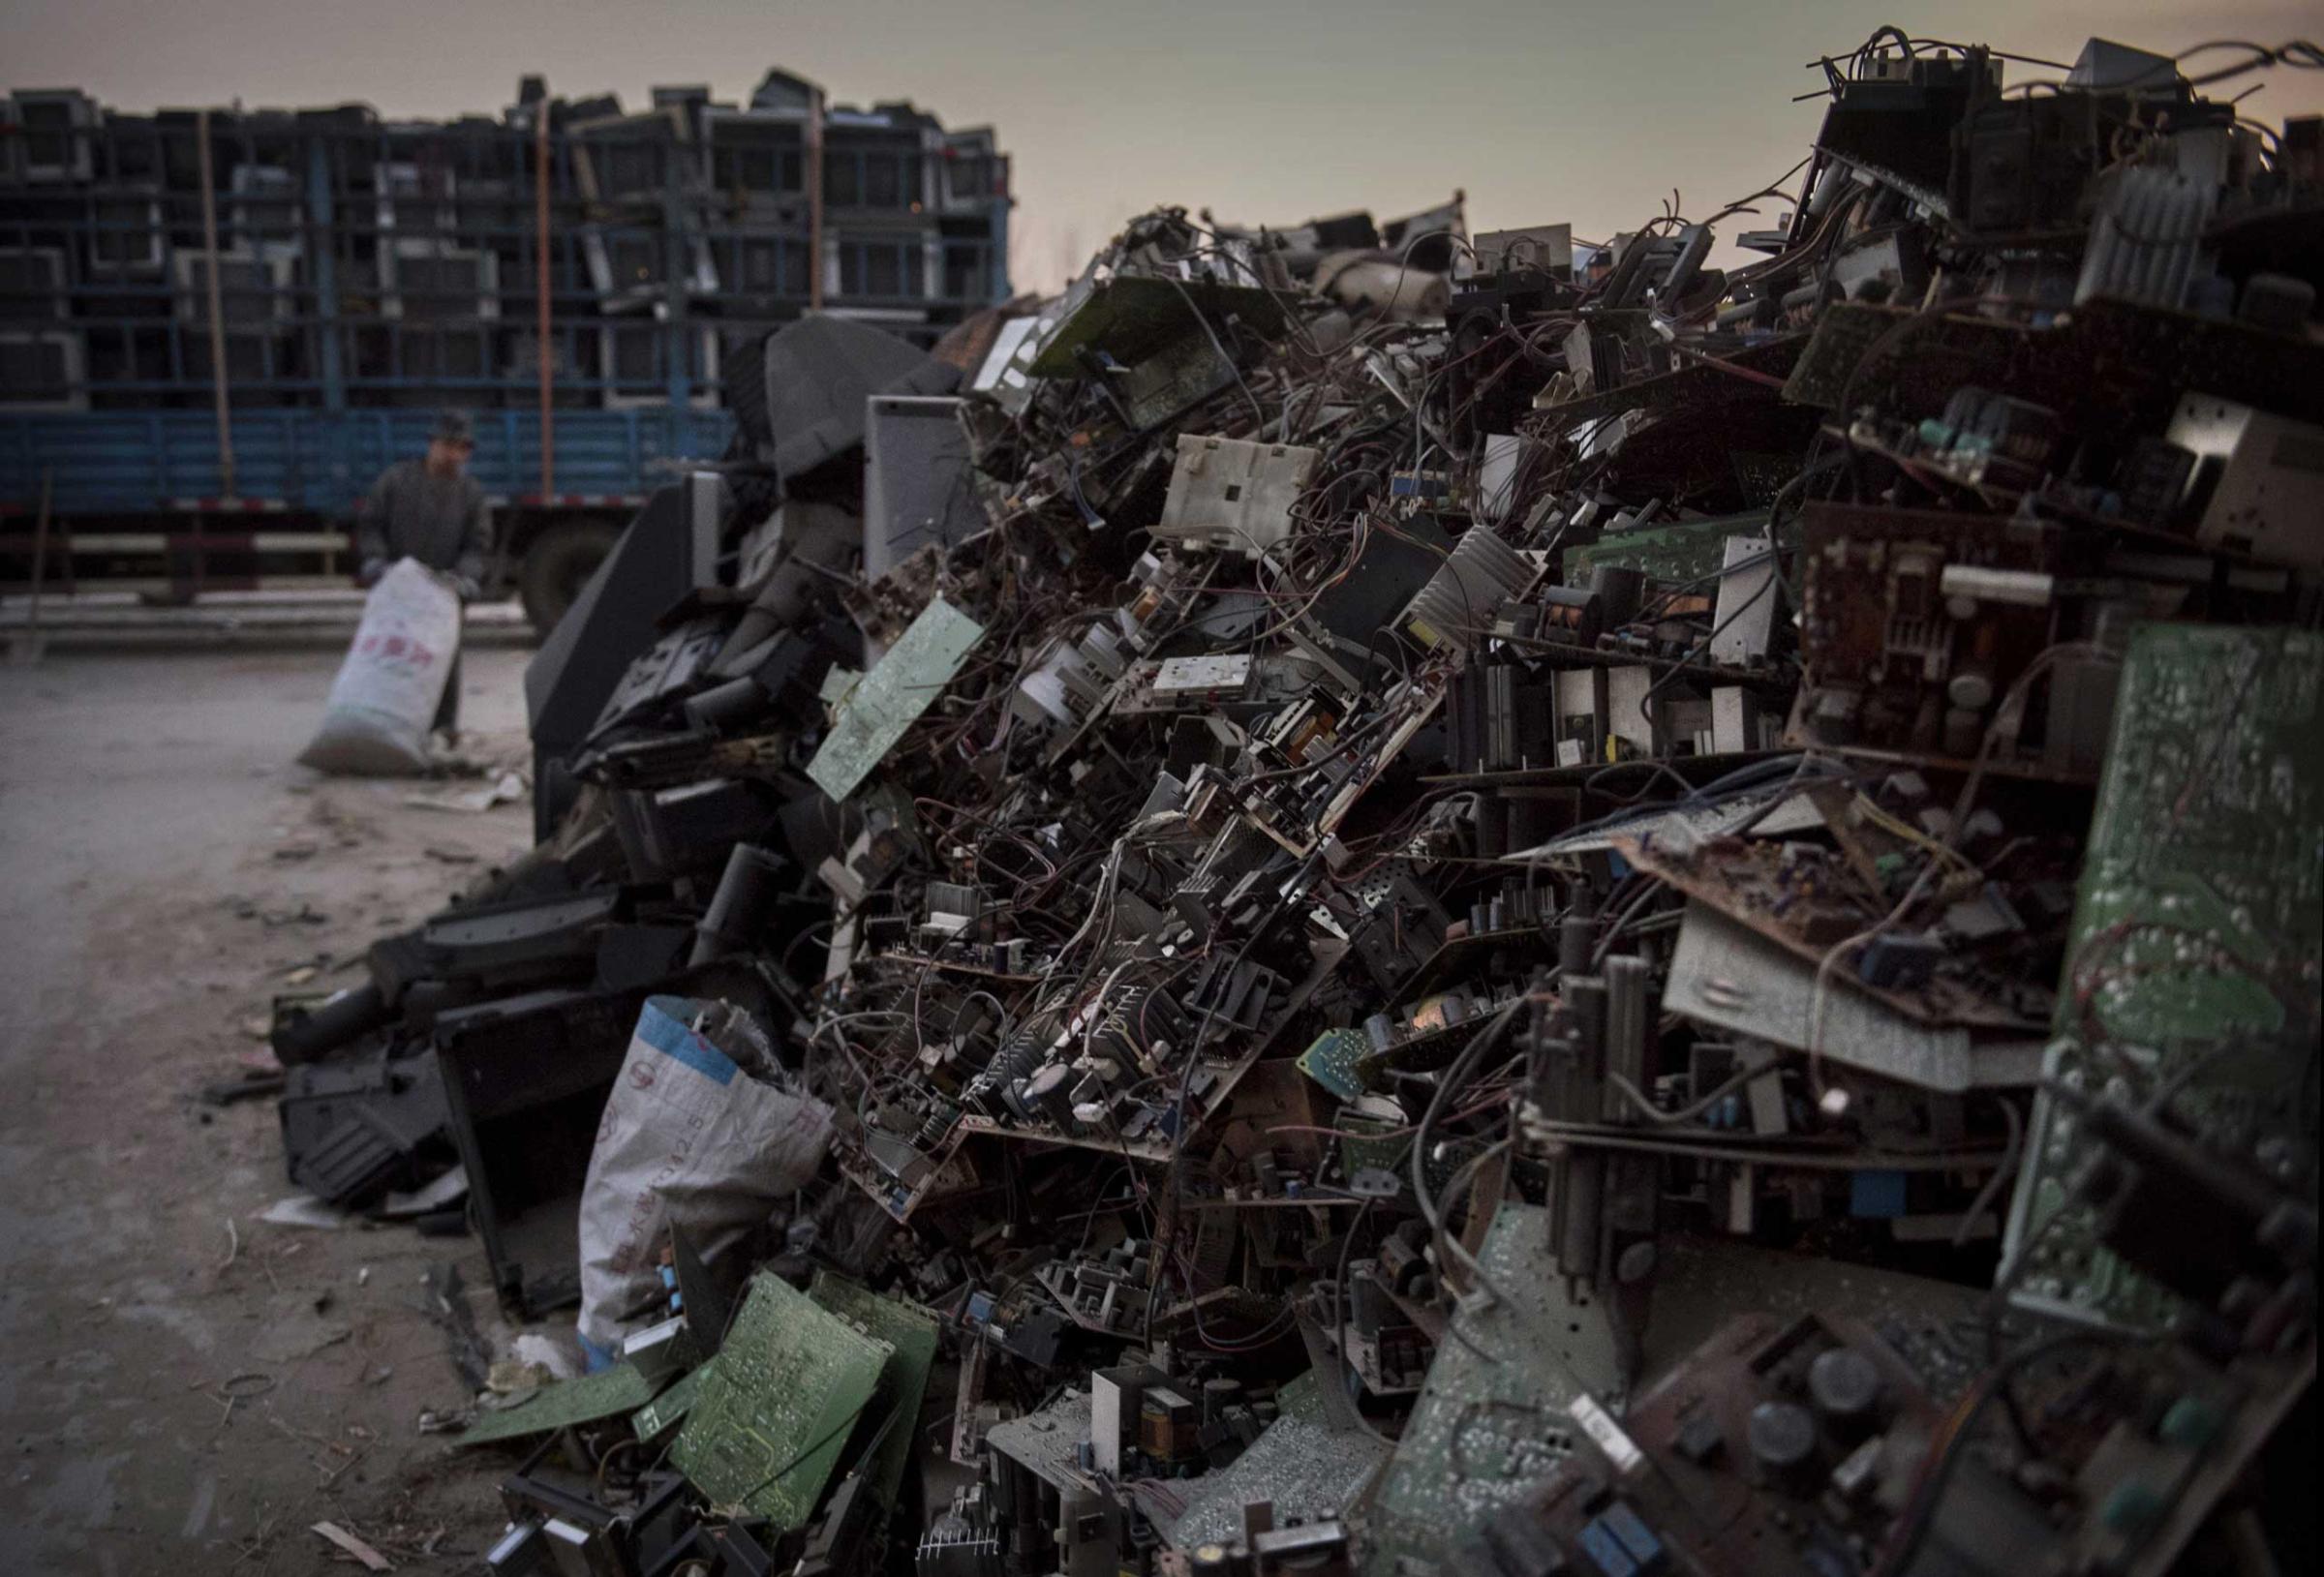 Discarded computer and electronics parts wait to be recycled in the Dong Xiao Kou village on Dec. 11, 2014 in Beijing.